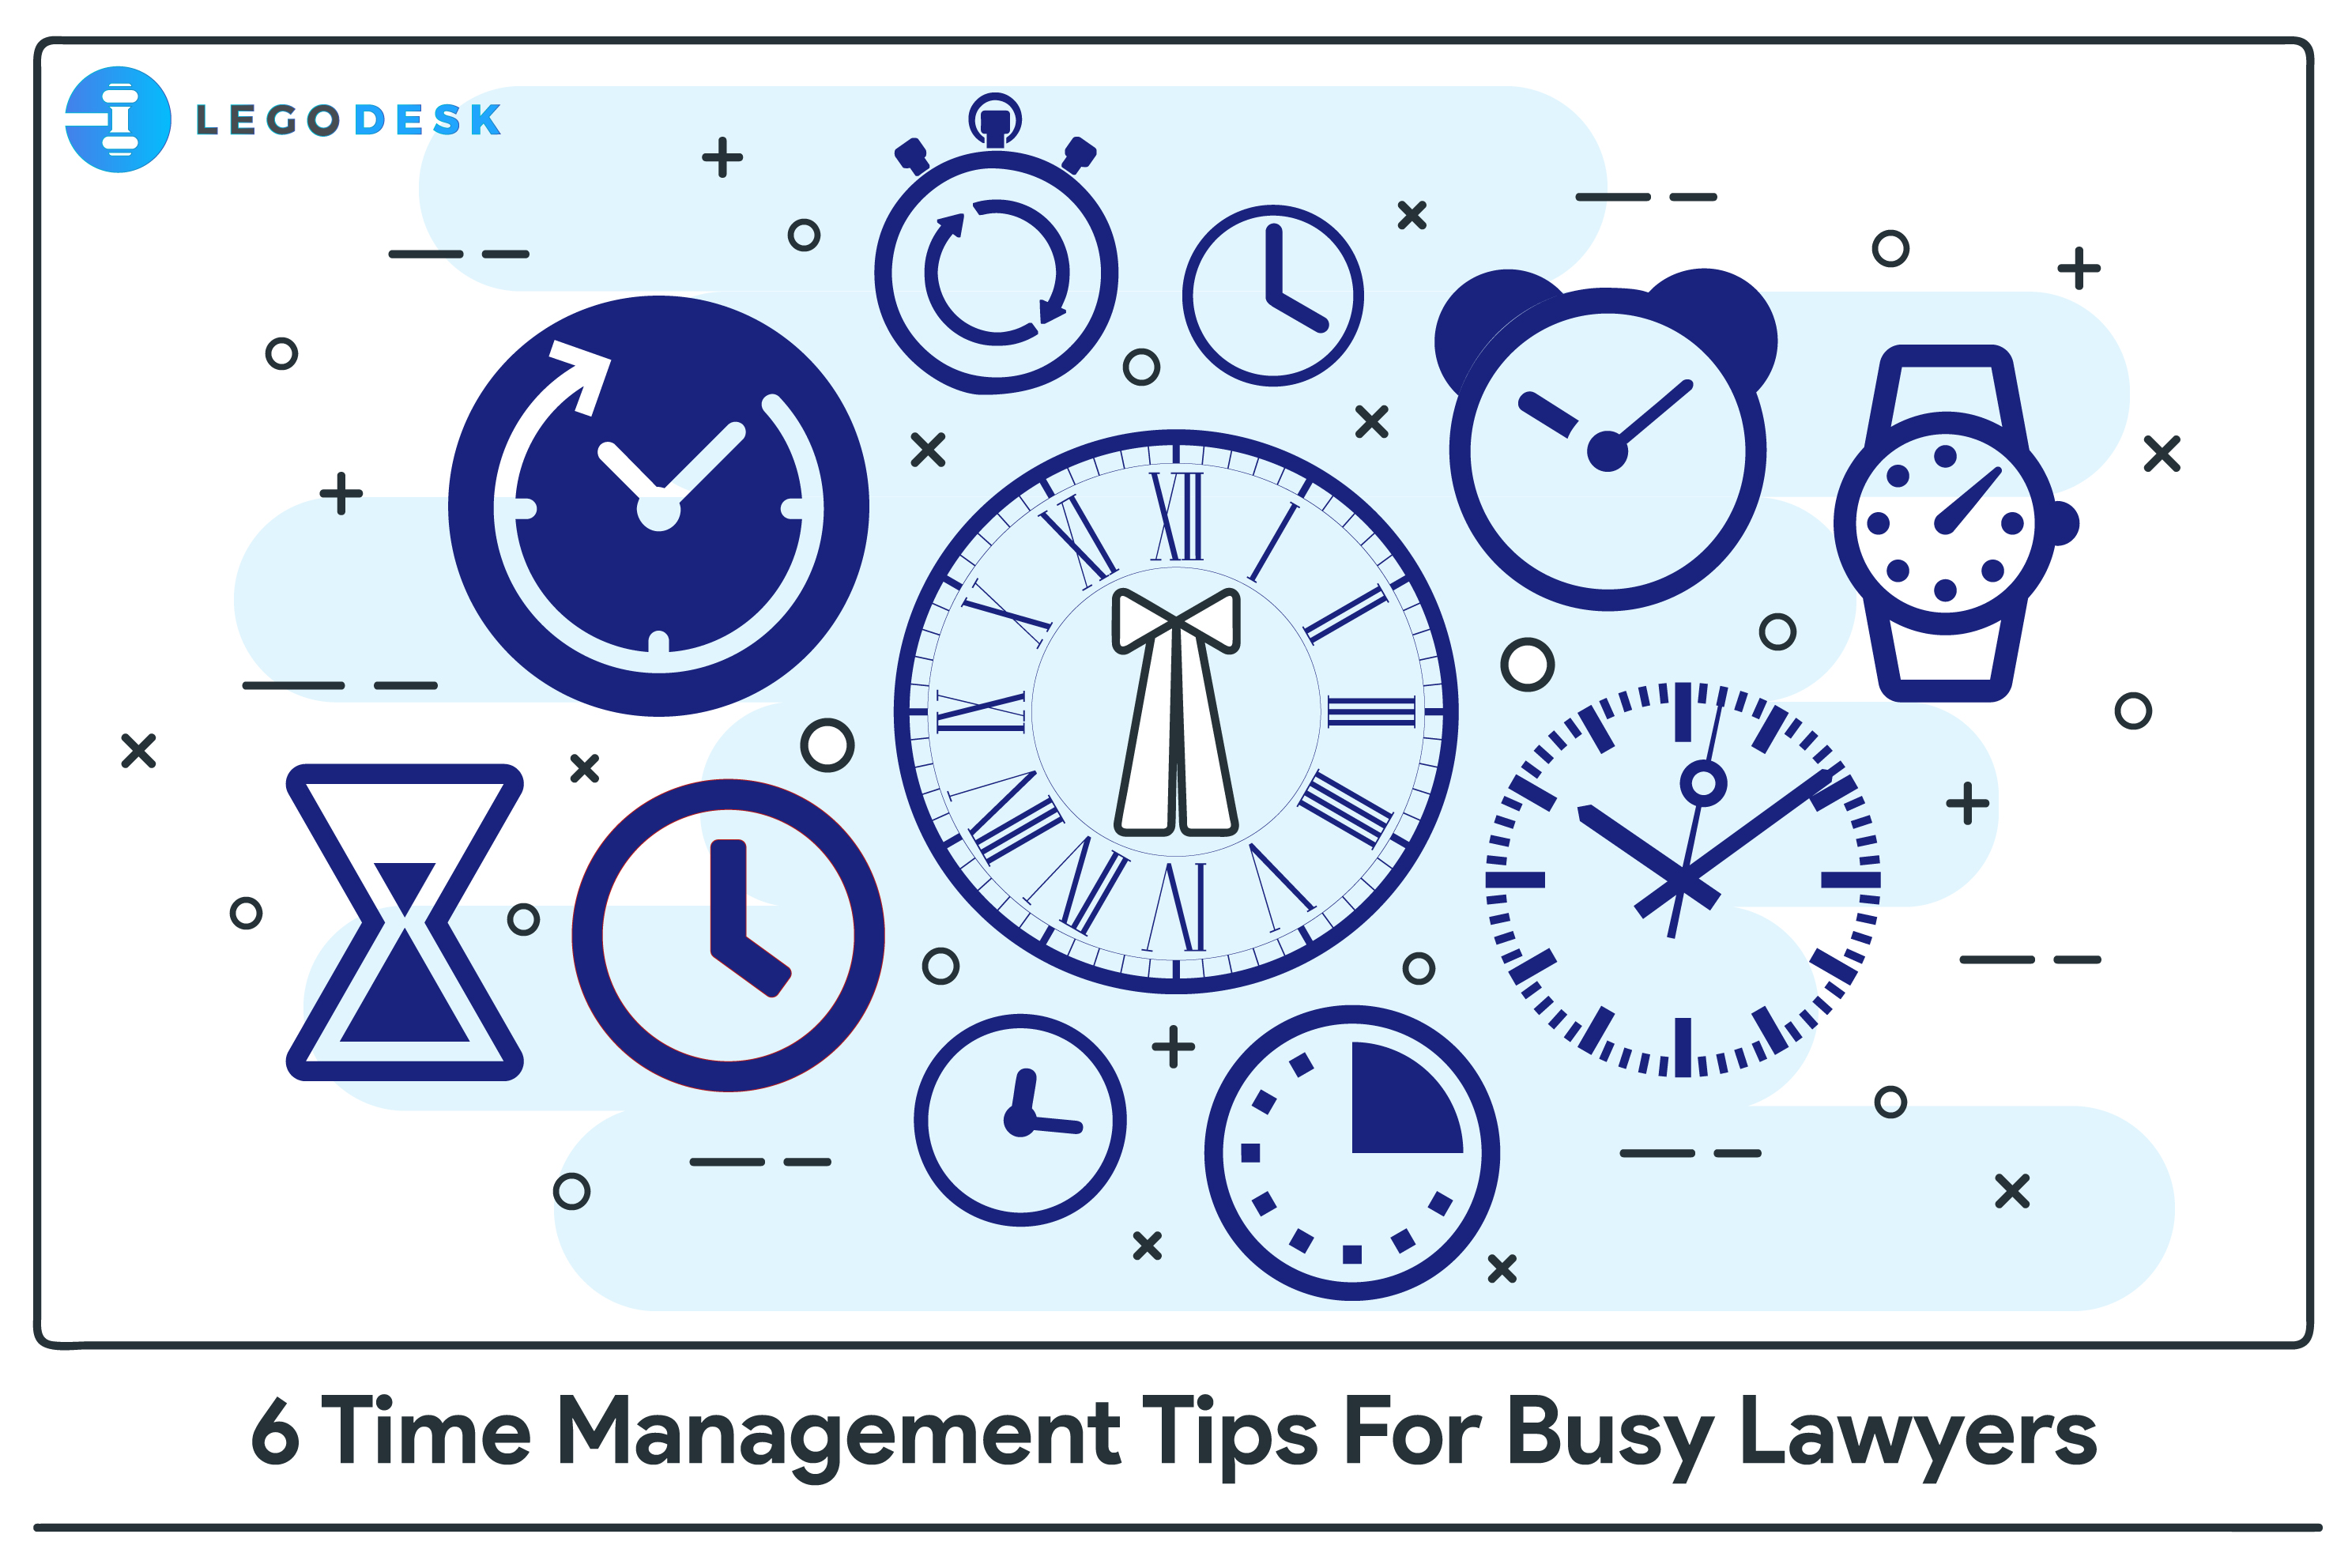 6 Time Management Tips For Busy Lawyers